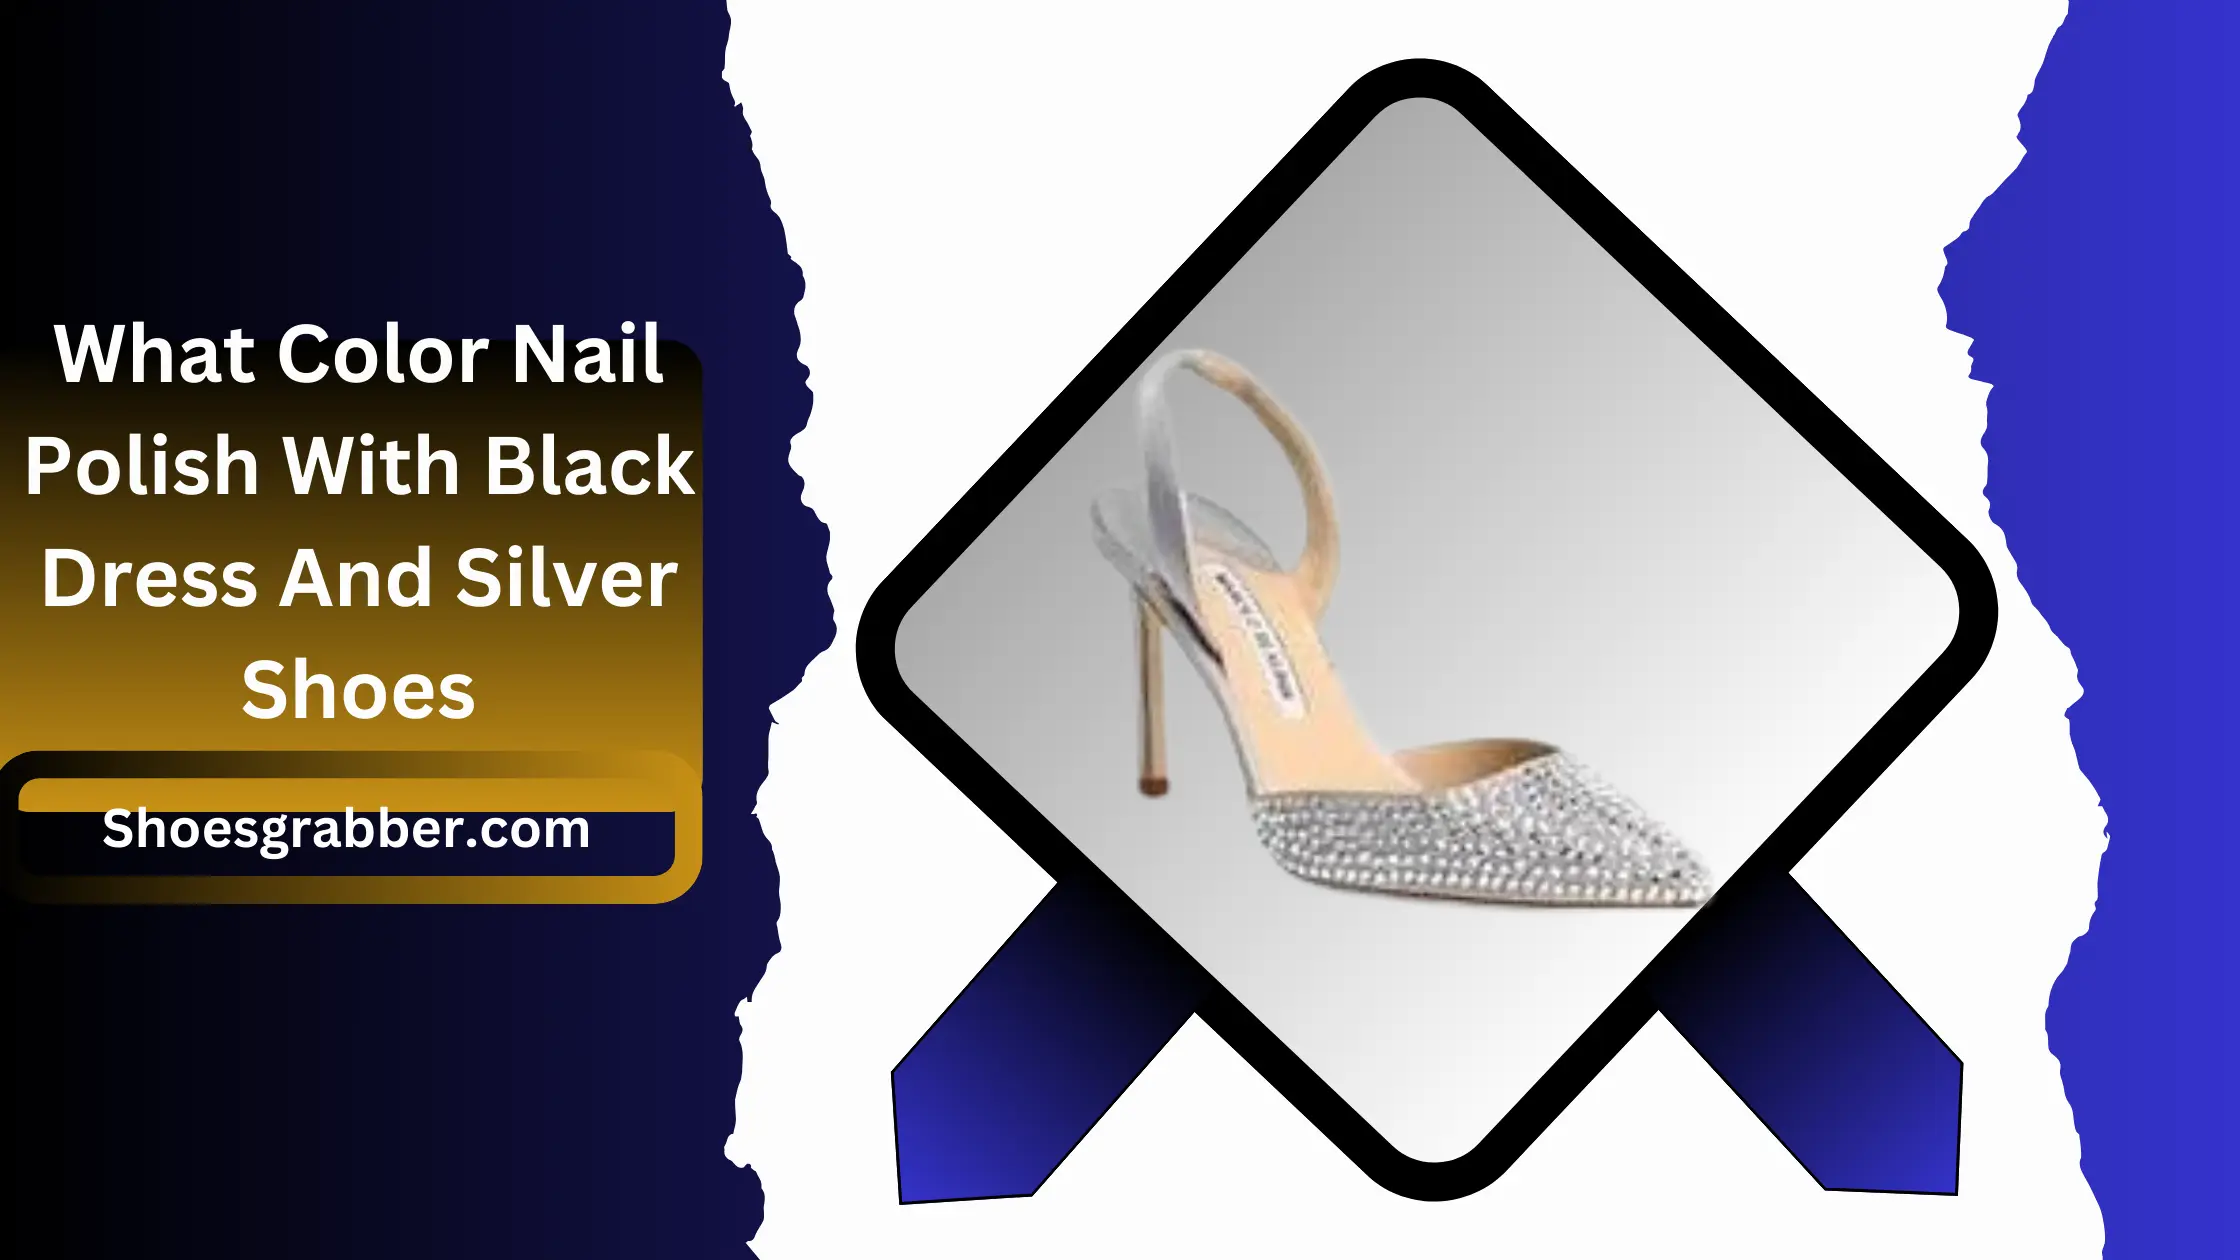 What Color Nail Polish With Black Dress And Silver Shoes - Party-Ready Look